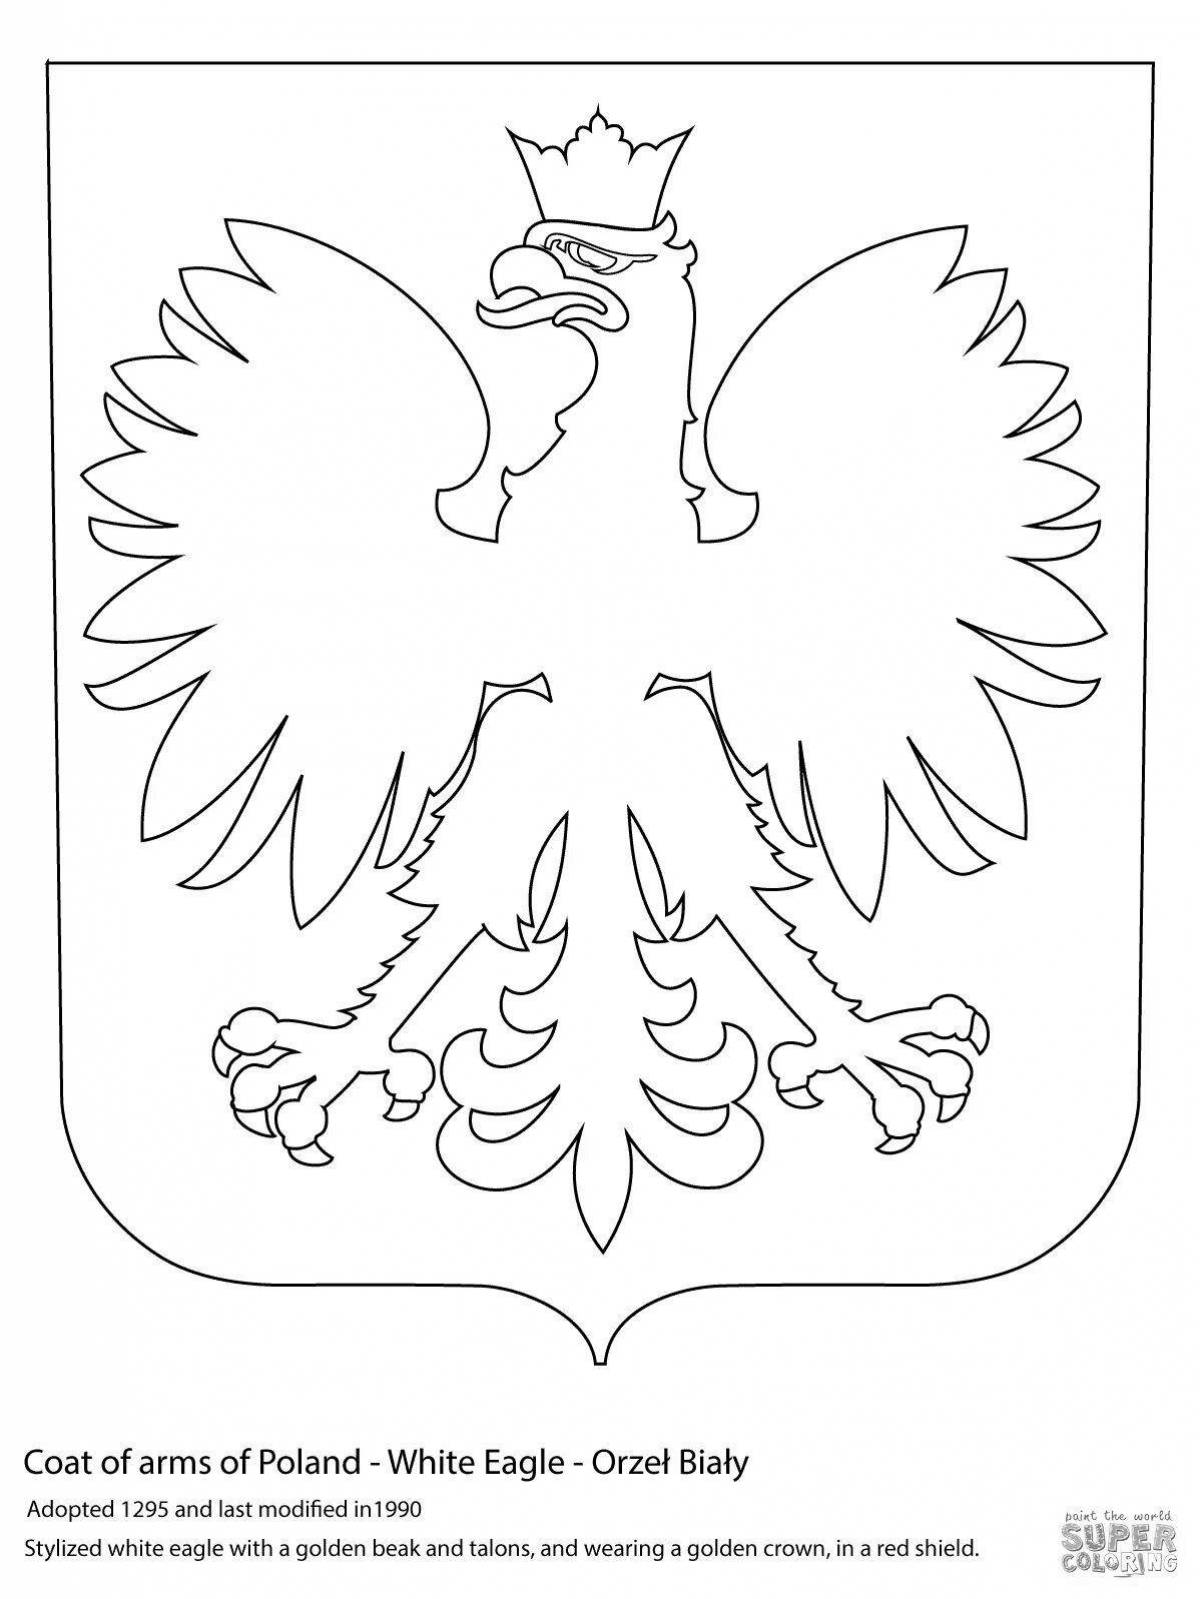 Coloring pages with coats of arms of the countries of the world